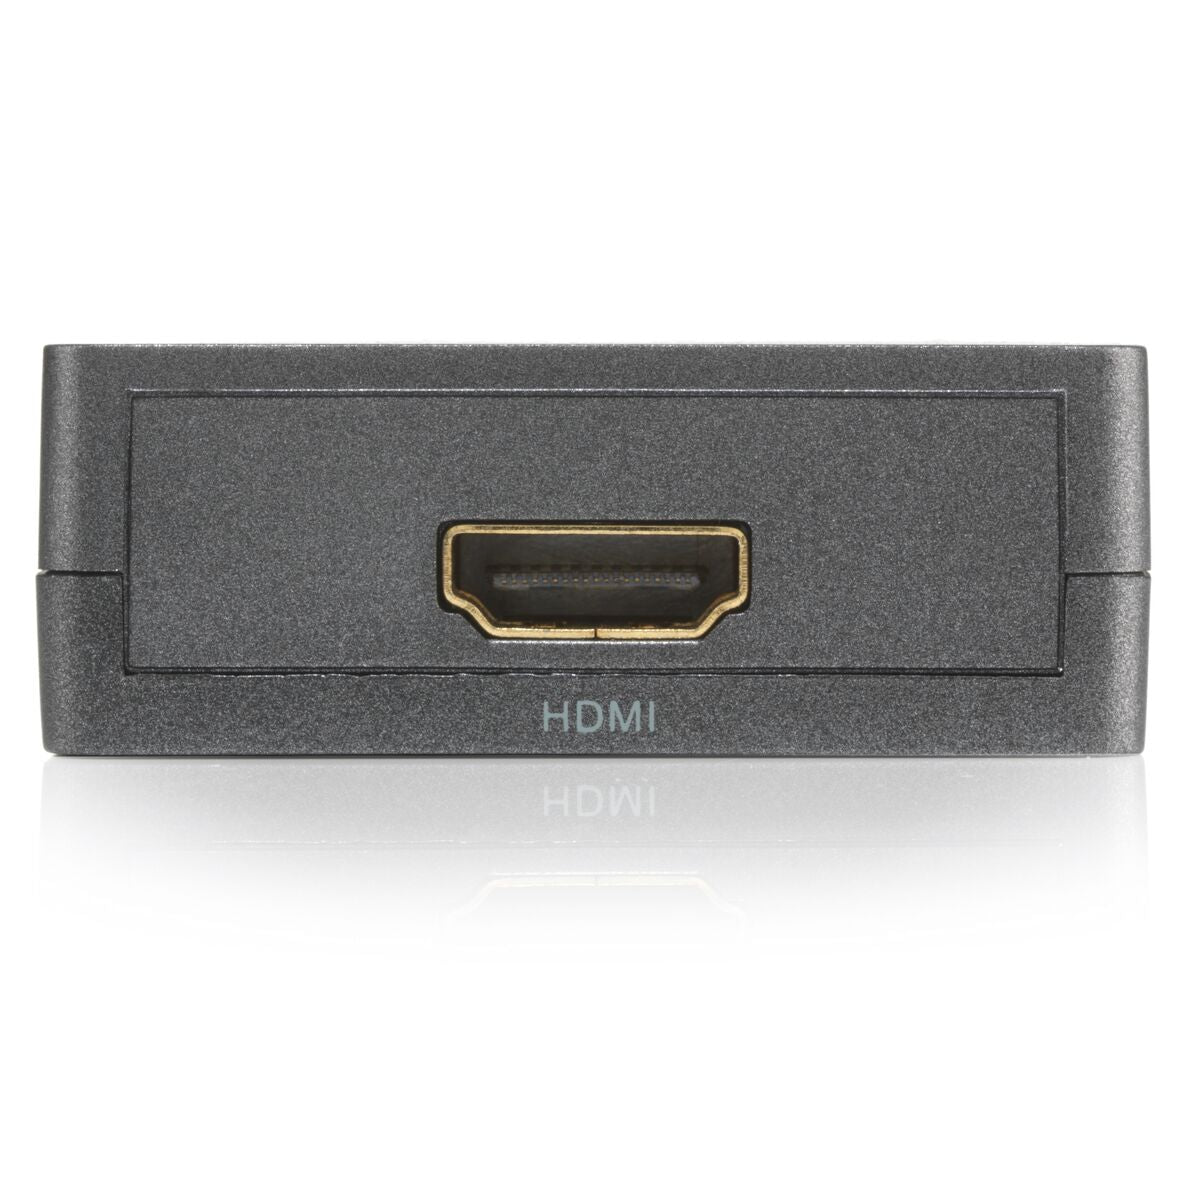 Connect HV15 - HDMI to VGA adapter